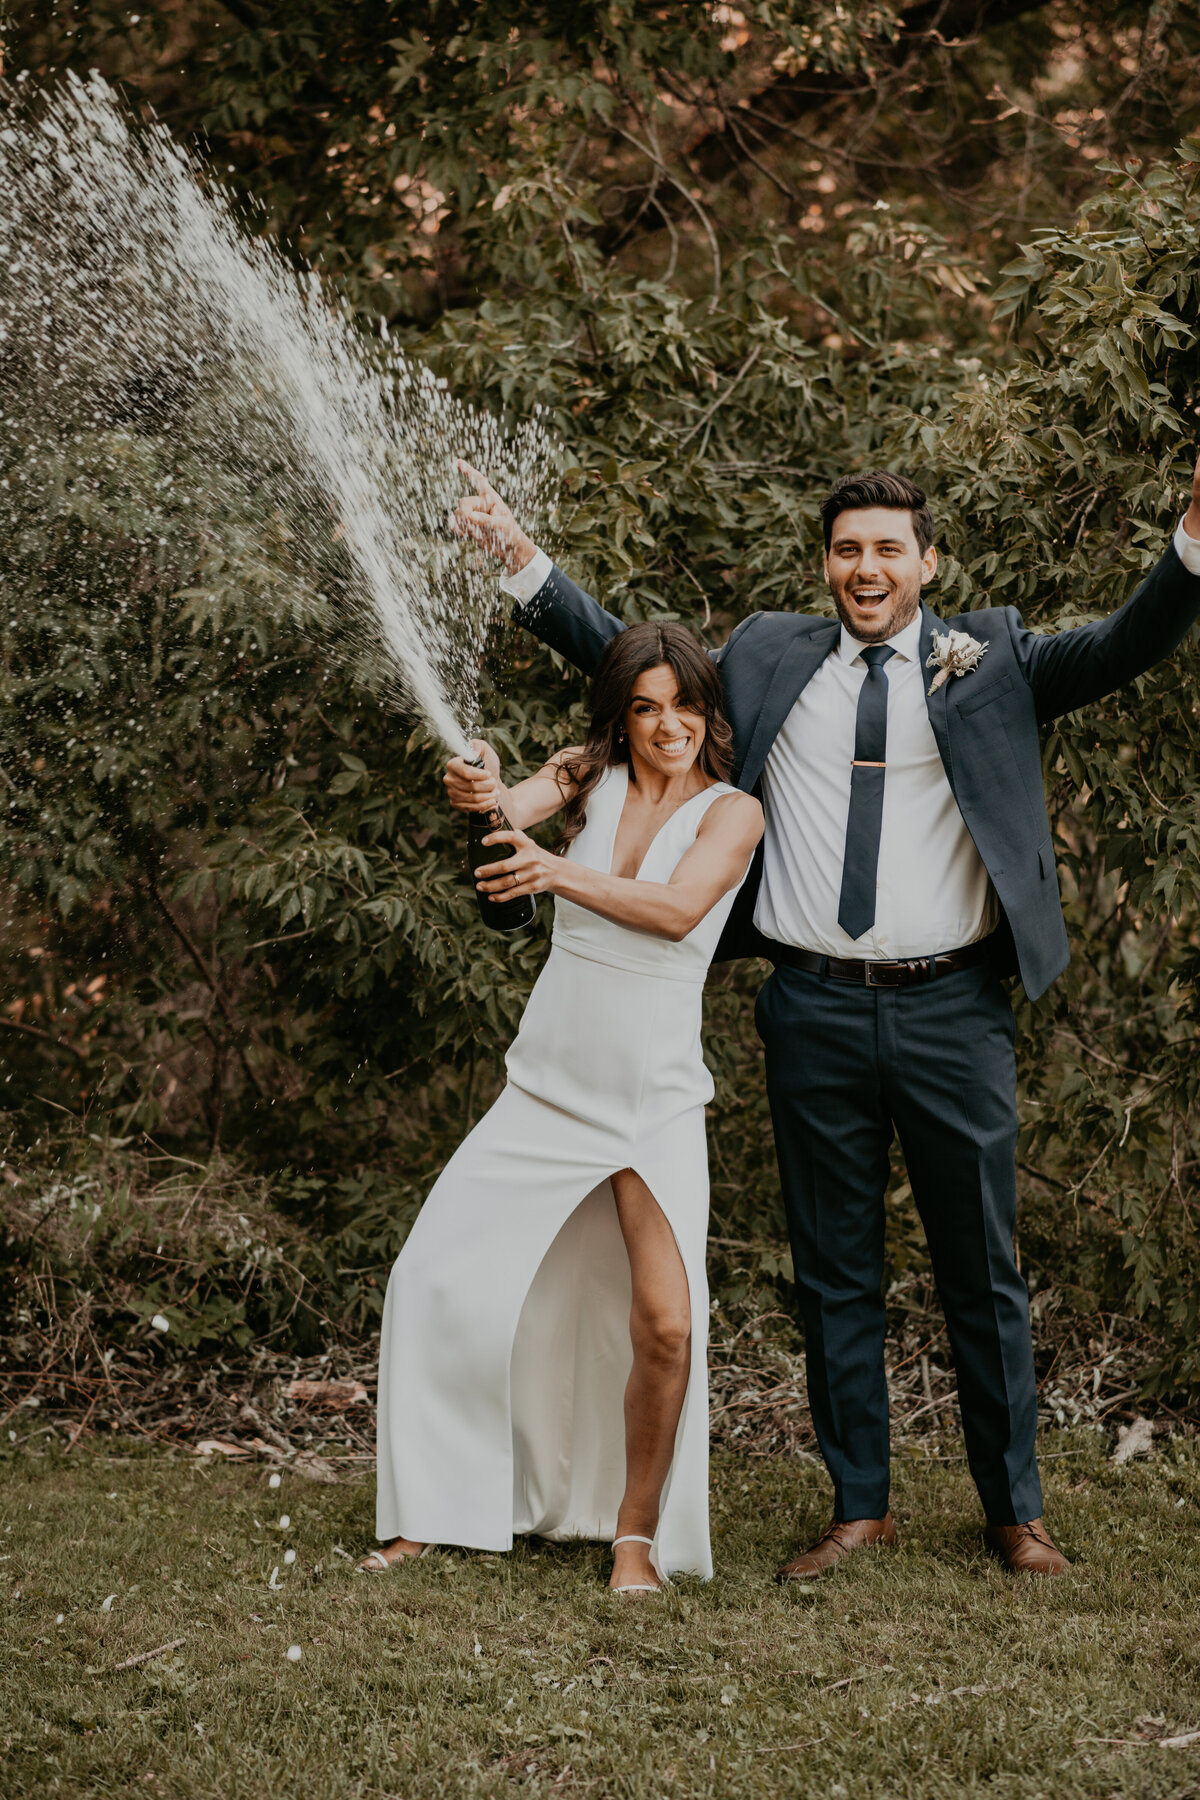 Bride and Groom pose for a fun and celebratory wedding photo after their backyard wedding ceremony in London, Ontario. Bride is spraying champagne in the air and the groom has his hands in the air, laughing. Captured by London, ON top wedding photographer Ashlee Ellison Photos and Films